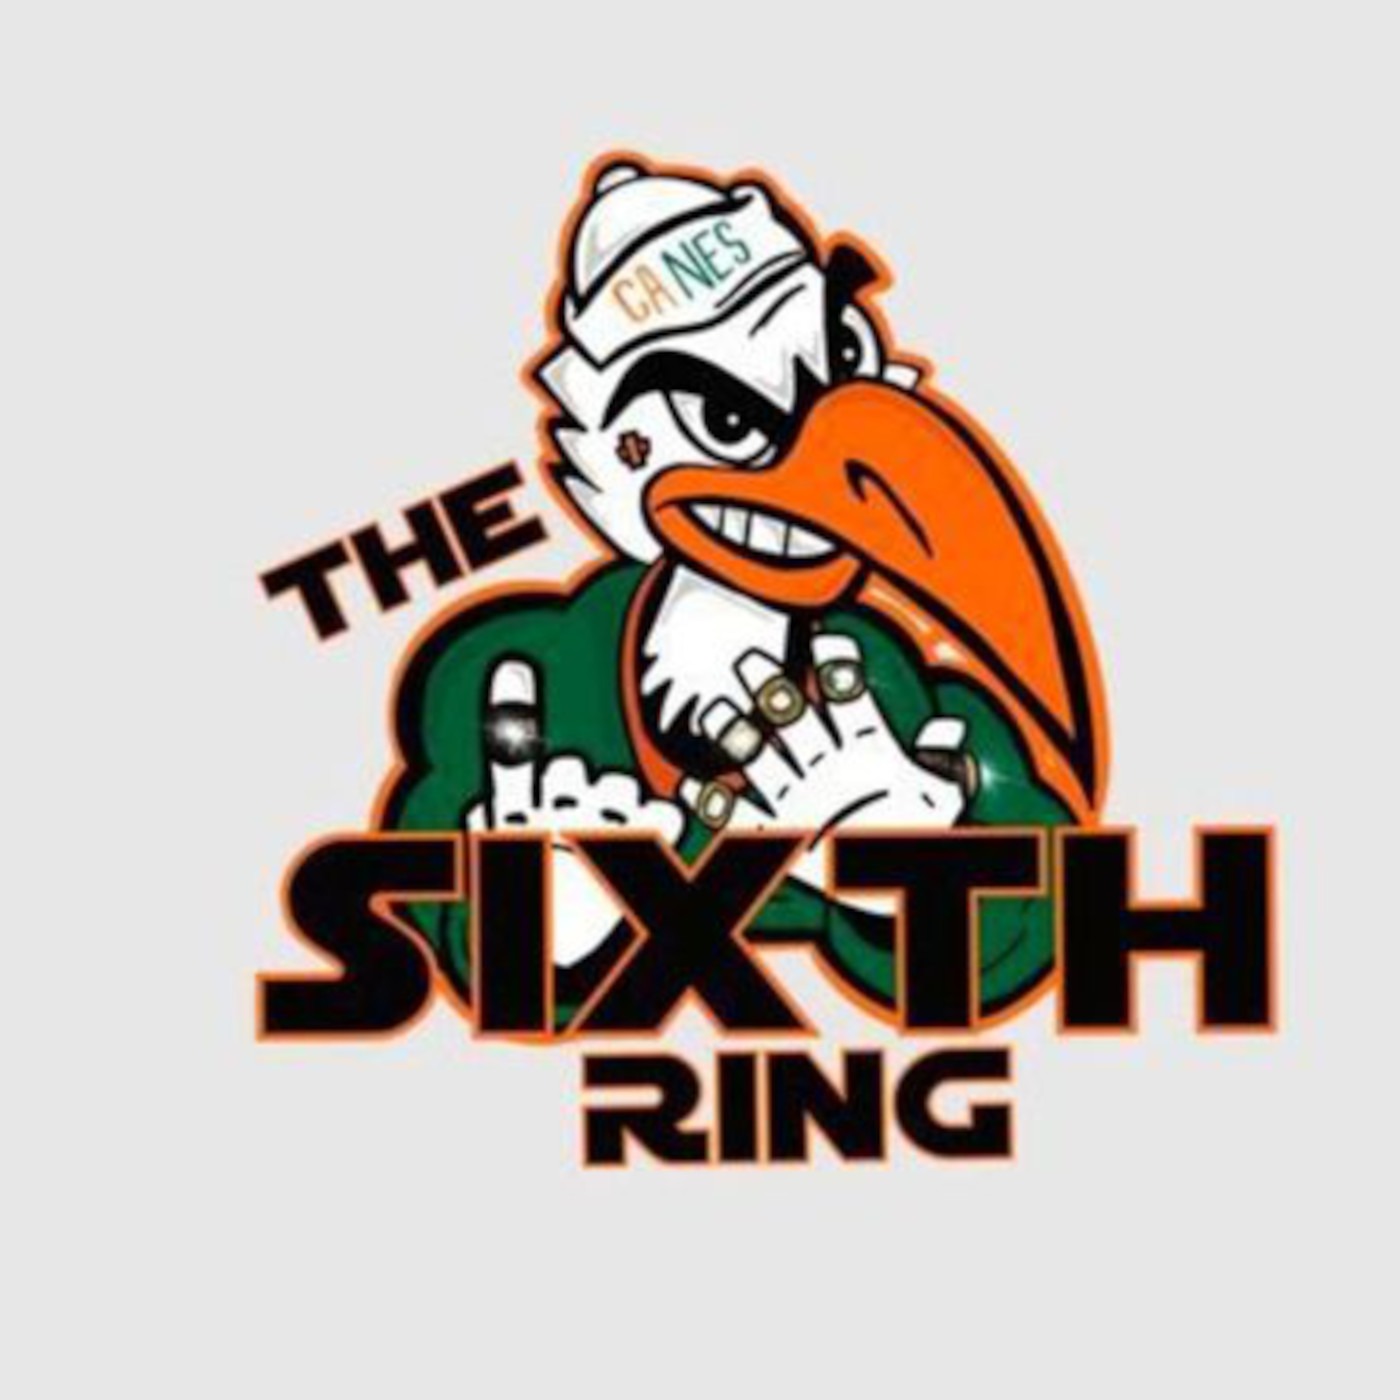 Henry Parrish and Girard Pringle | Sixth Ring Canes